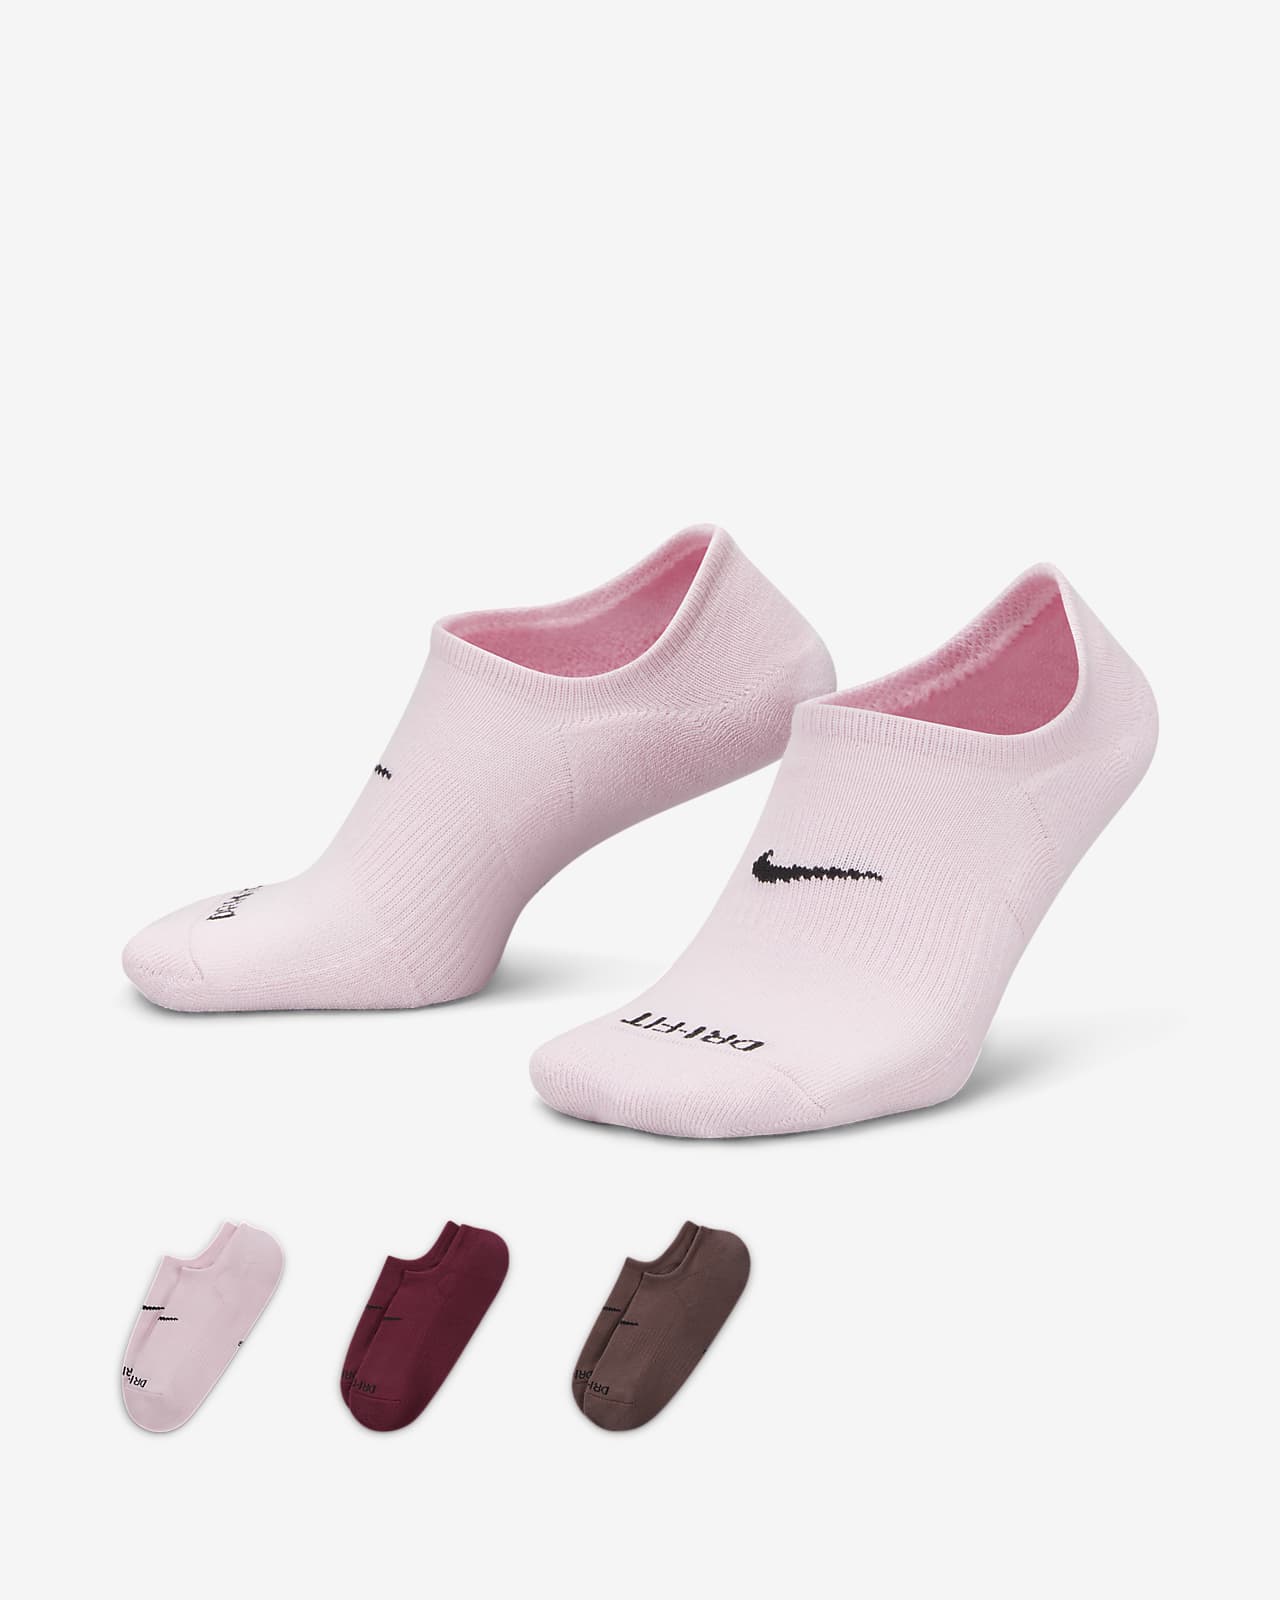 Nike Everyday Plus Lightweight Chaussettes Invisibles (3 Paires) Femme